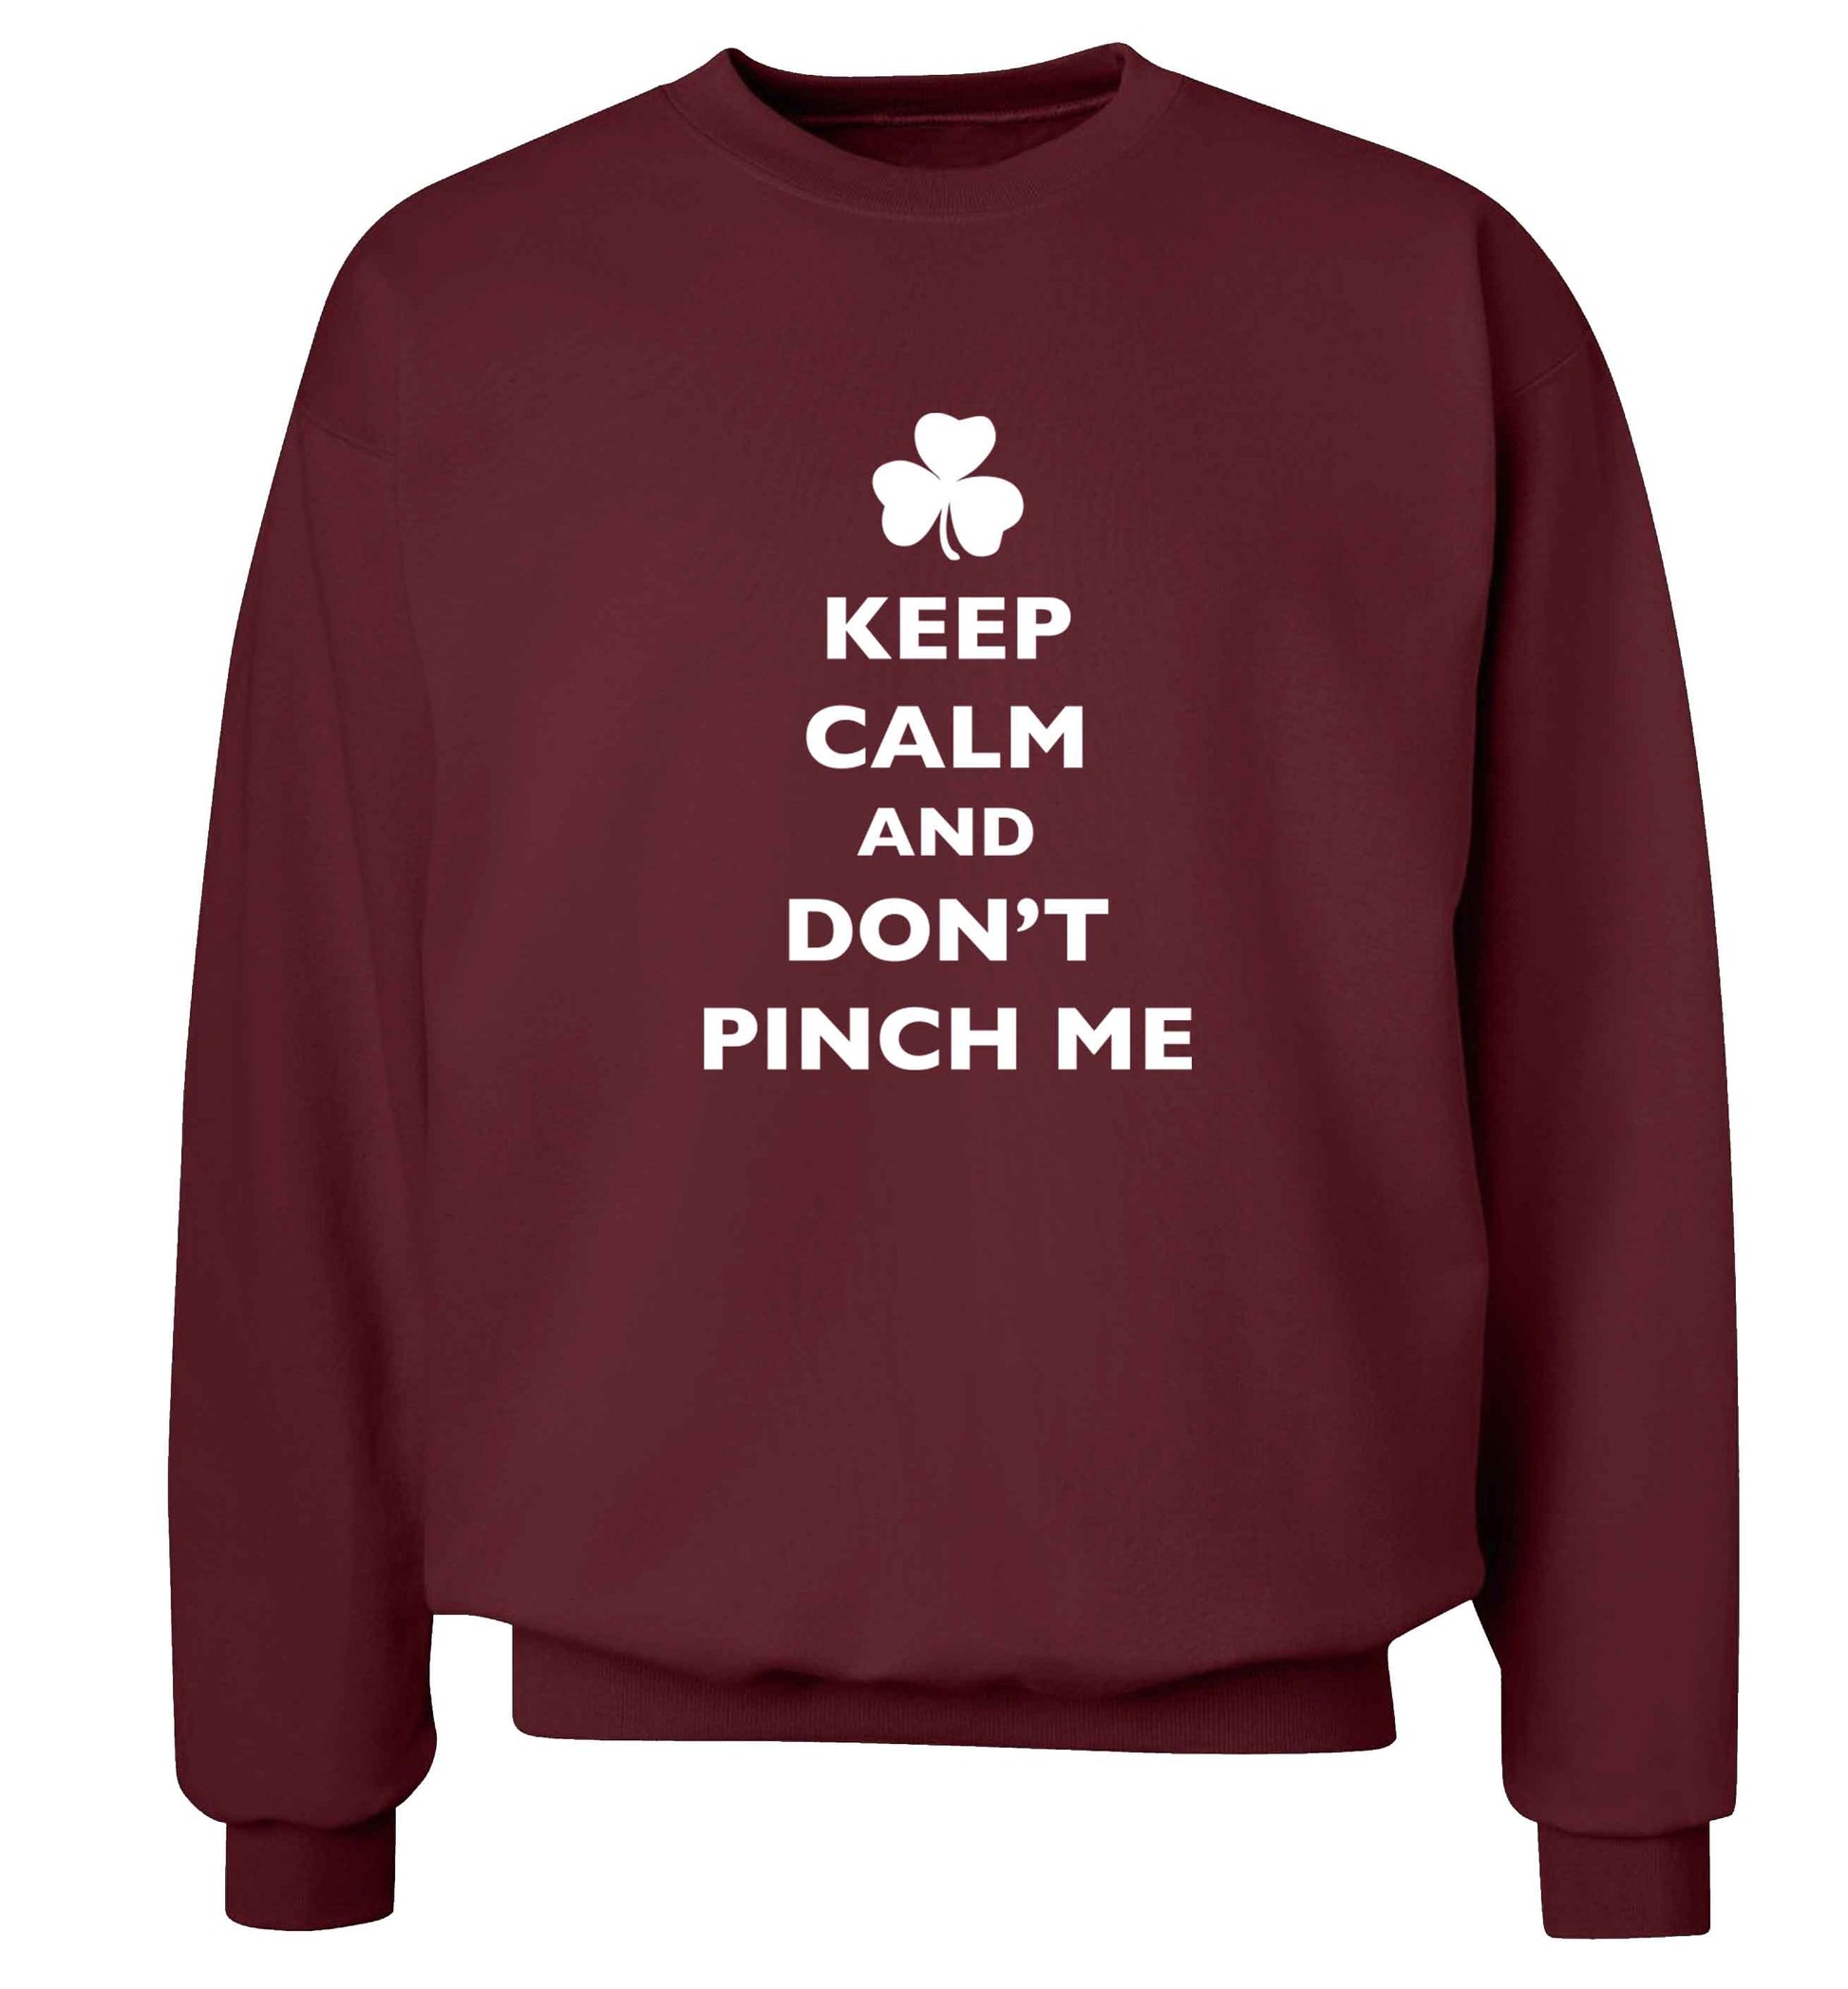 Keep calm and don't pinch me adult's unisex maroon sweater 2XL